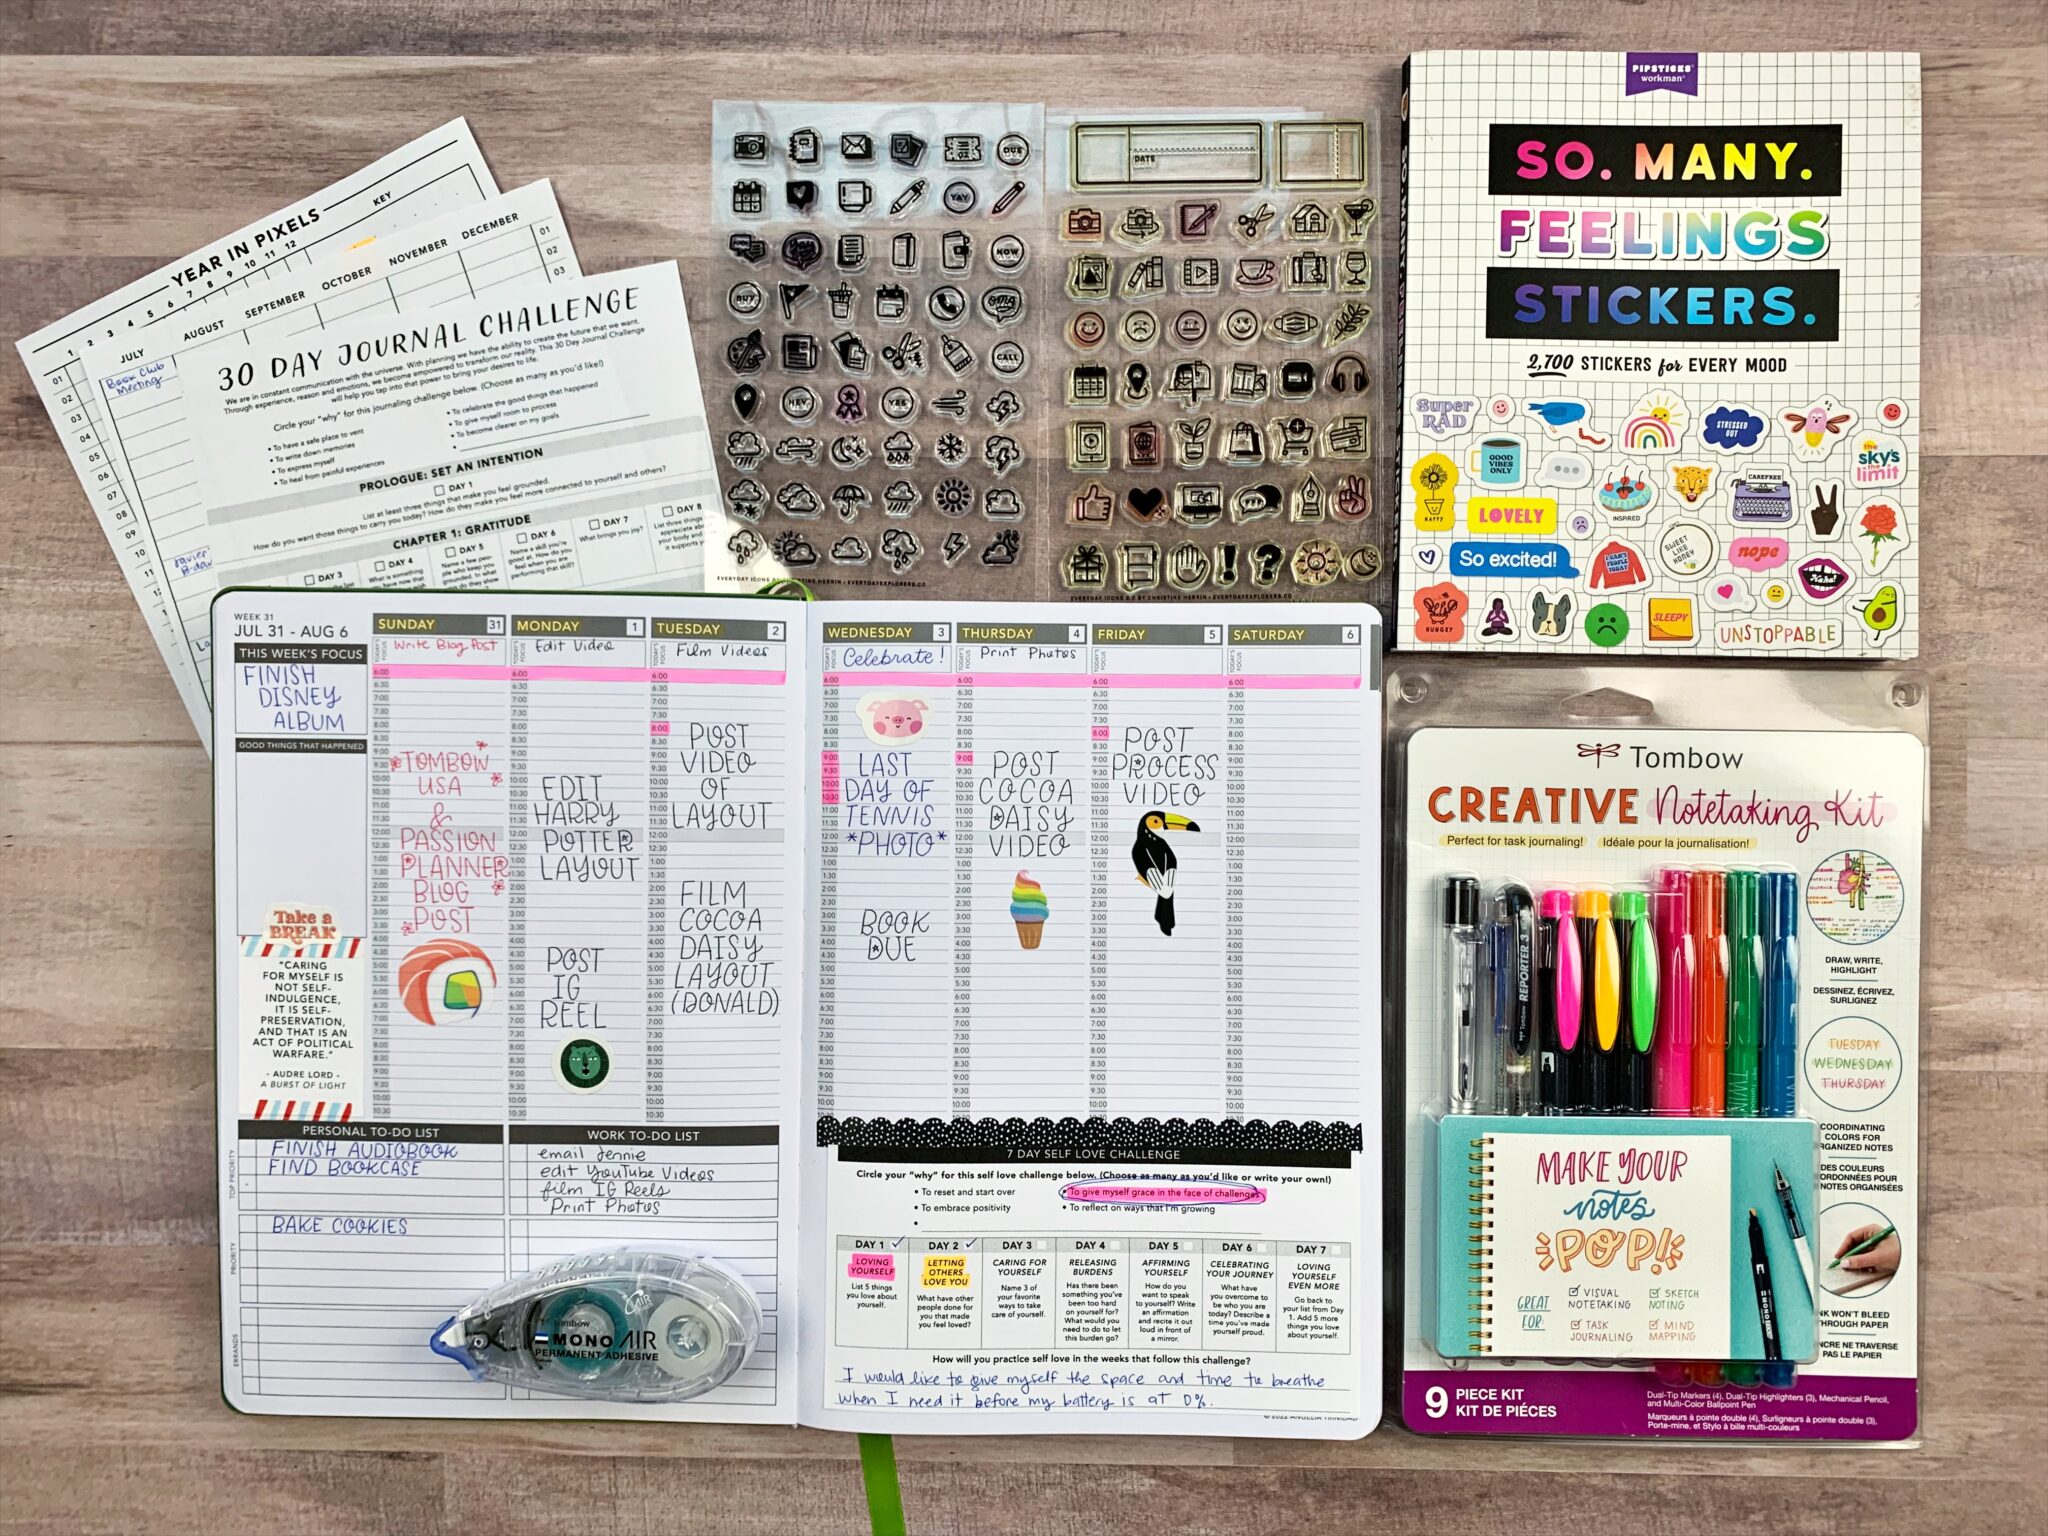 Five Passion Planner Printables To Use With The Creative Notetaking Kit